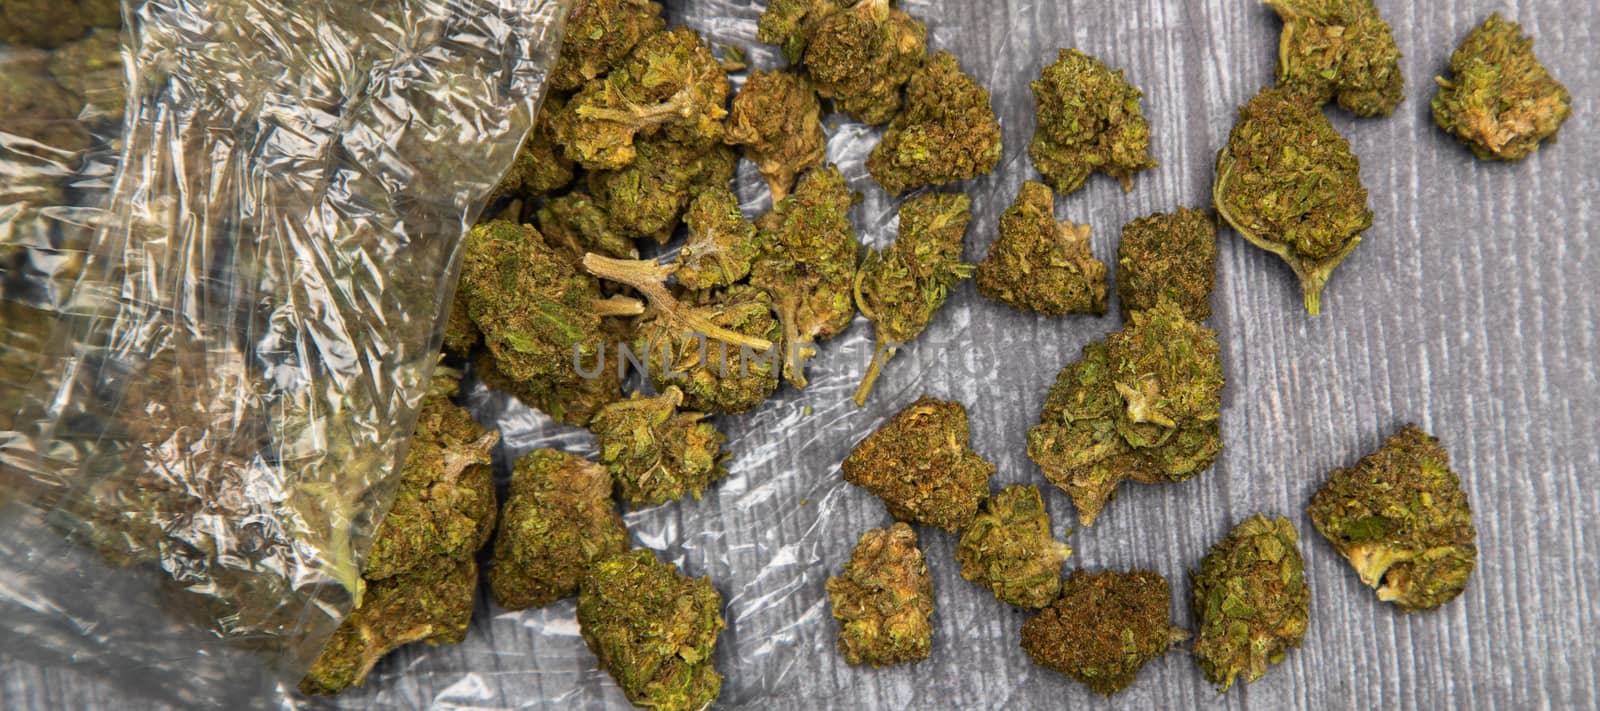 Large buds of medicinal marijuana pour out of a clear plastic bag. Sitting on wooden surface.